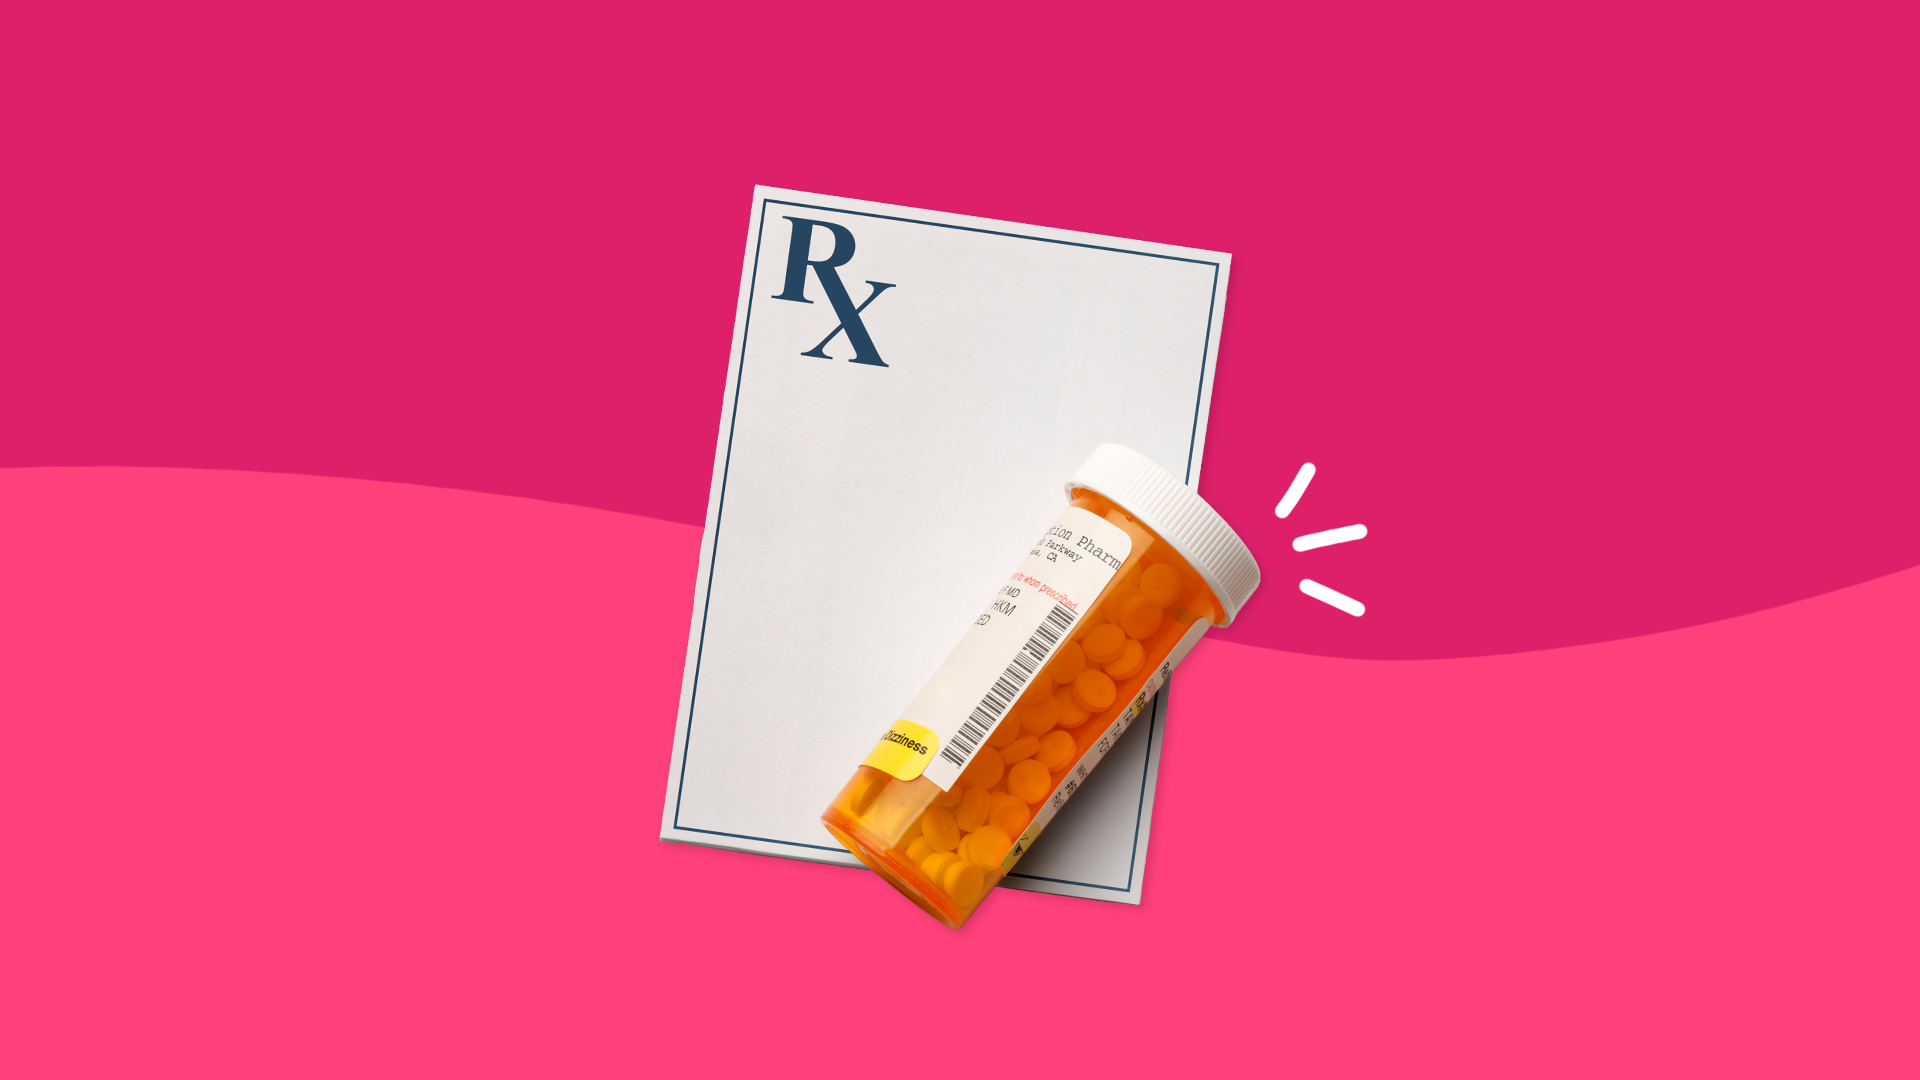 Prescription pad and bottle: Abilify side effects